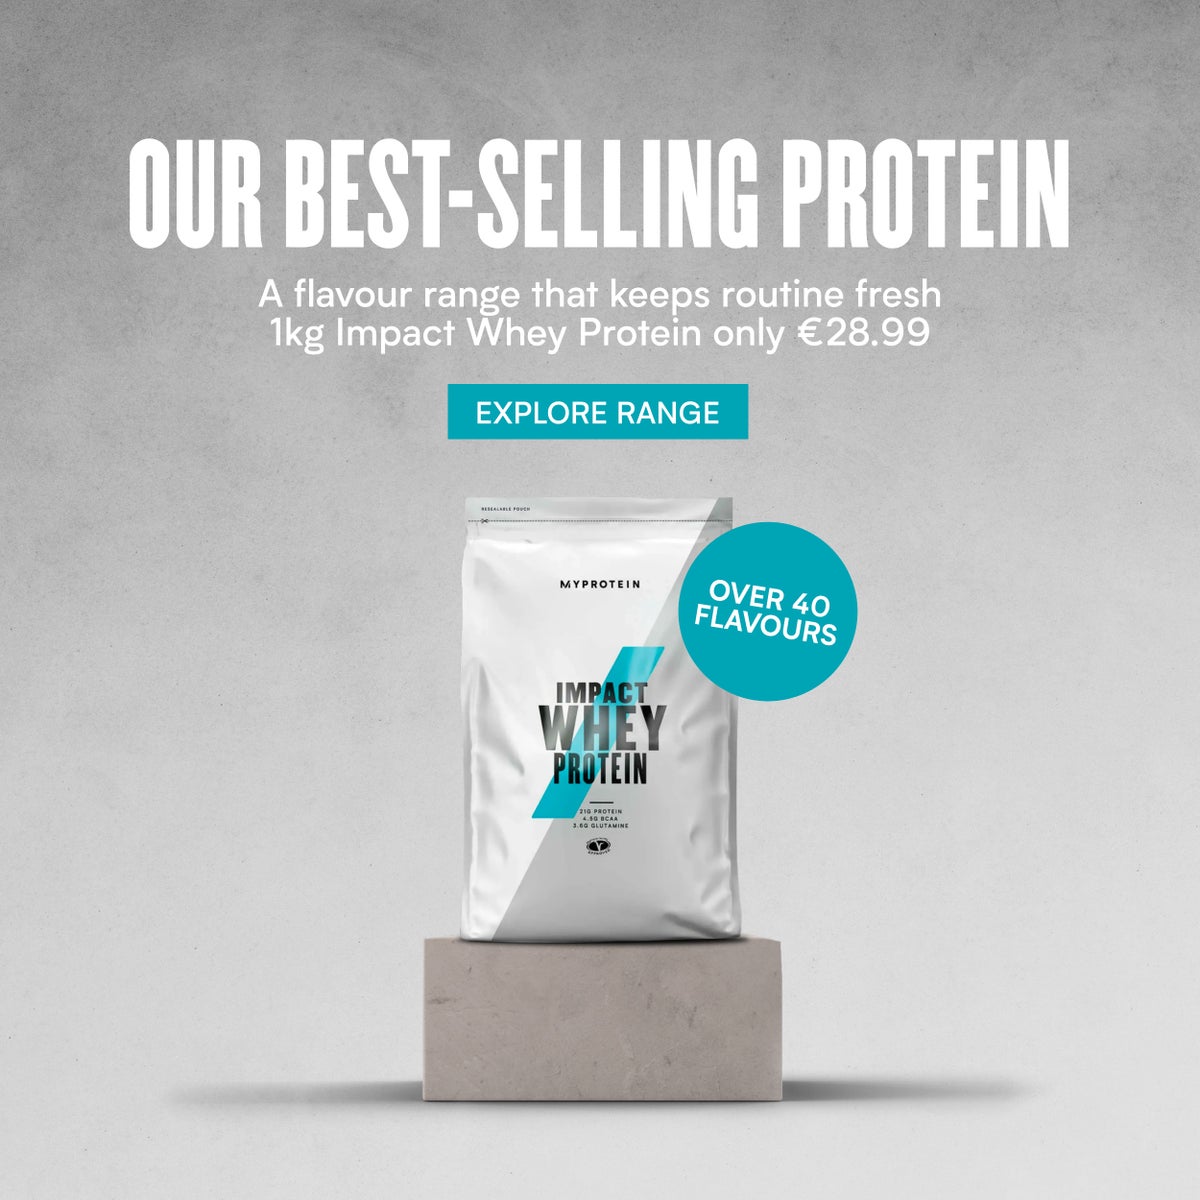 A packet of 1kg Impact Whey Protein from Myprotein available at €28.99 and in over 40 different flavours.